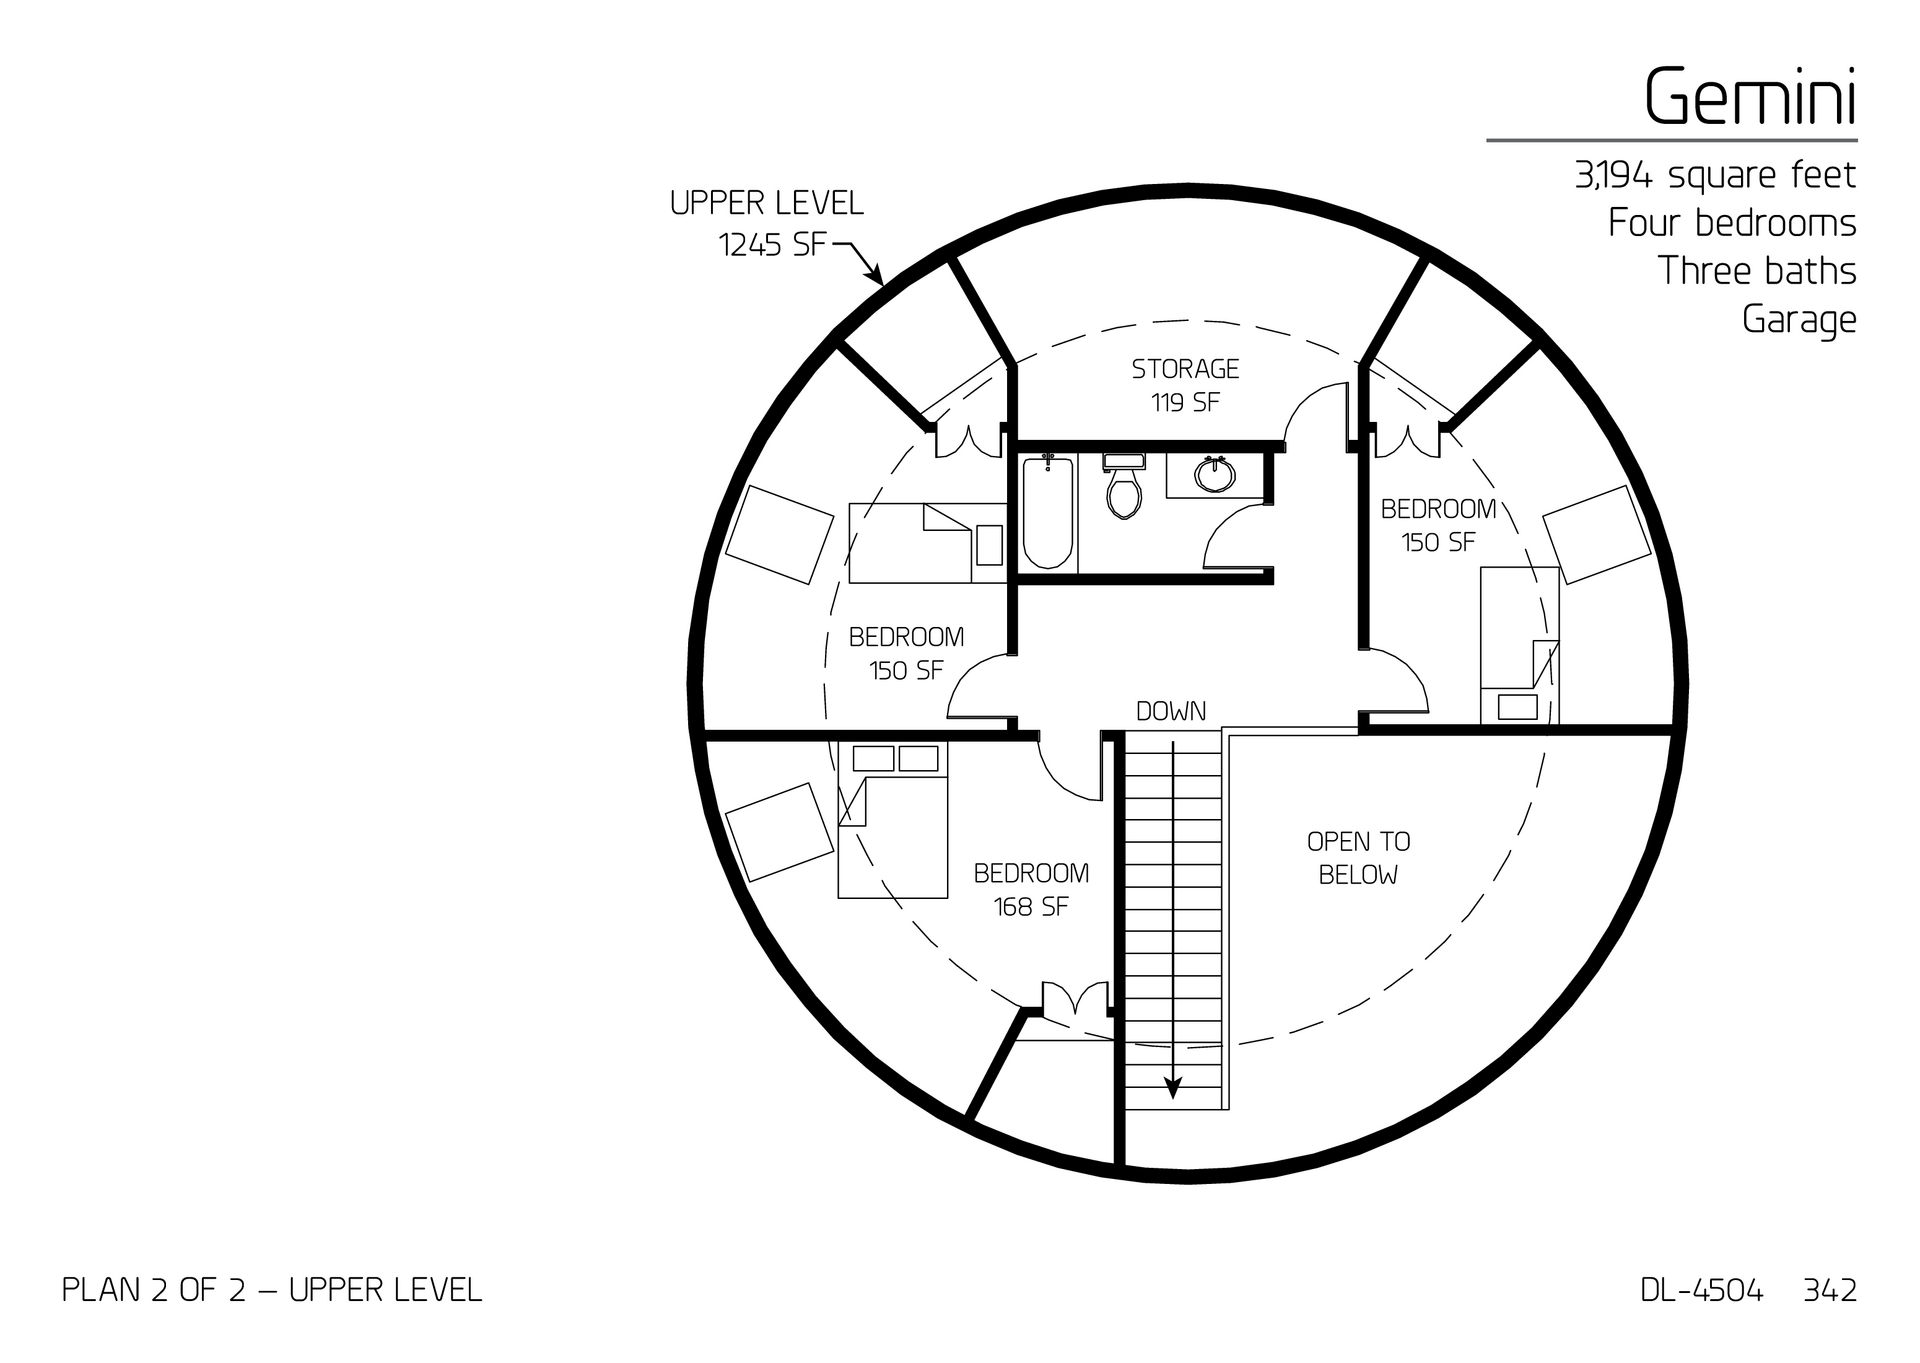 Gemini: Upper Floor of a 30' and 45' Diameter Double Dome, 3,194 SF, Four-Bedroom, Two and a Half-Bath Floor Plan.